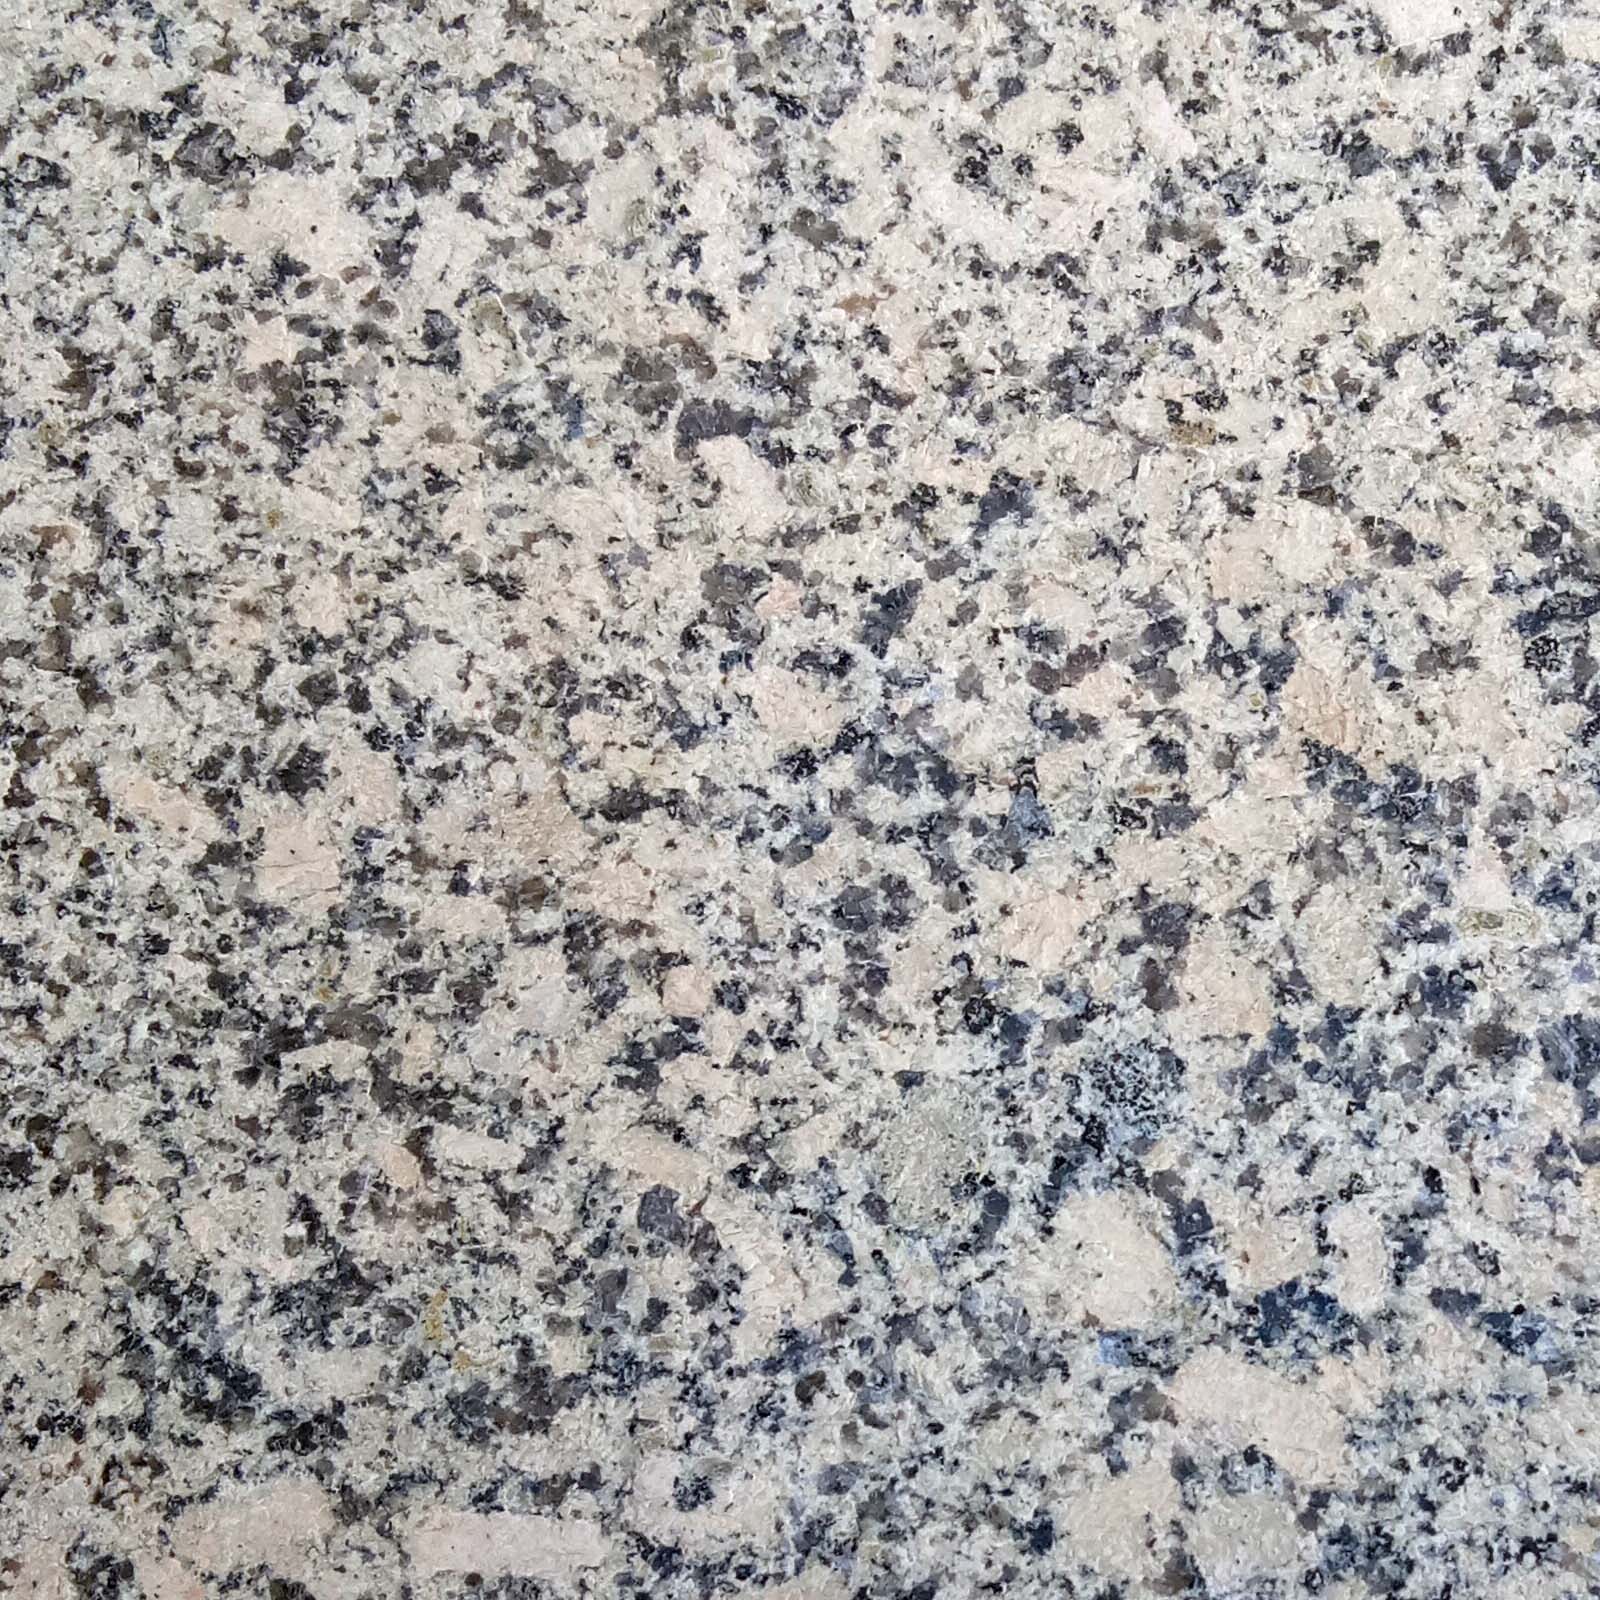 Crystal Yellow Granite From A Leading Granite Supplier